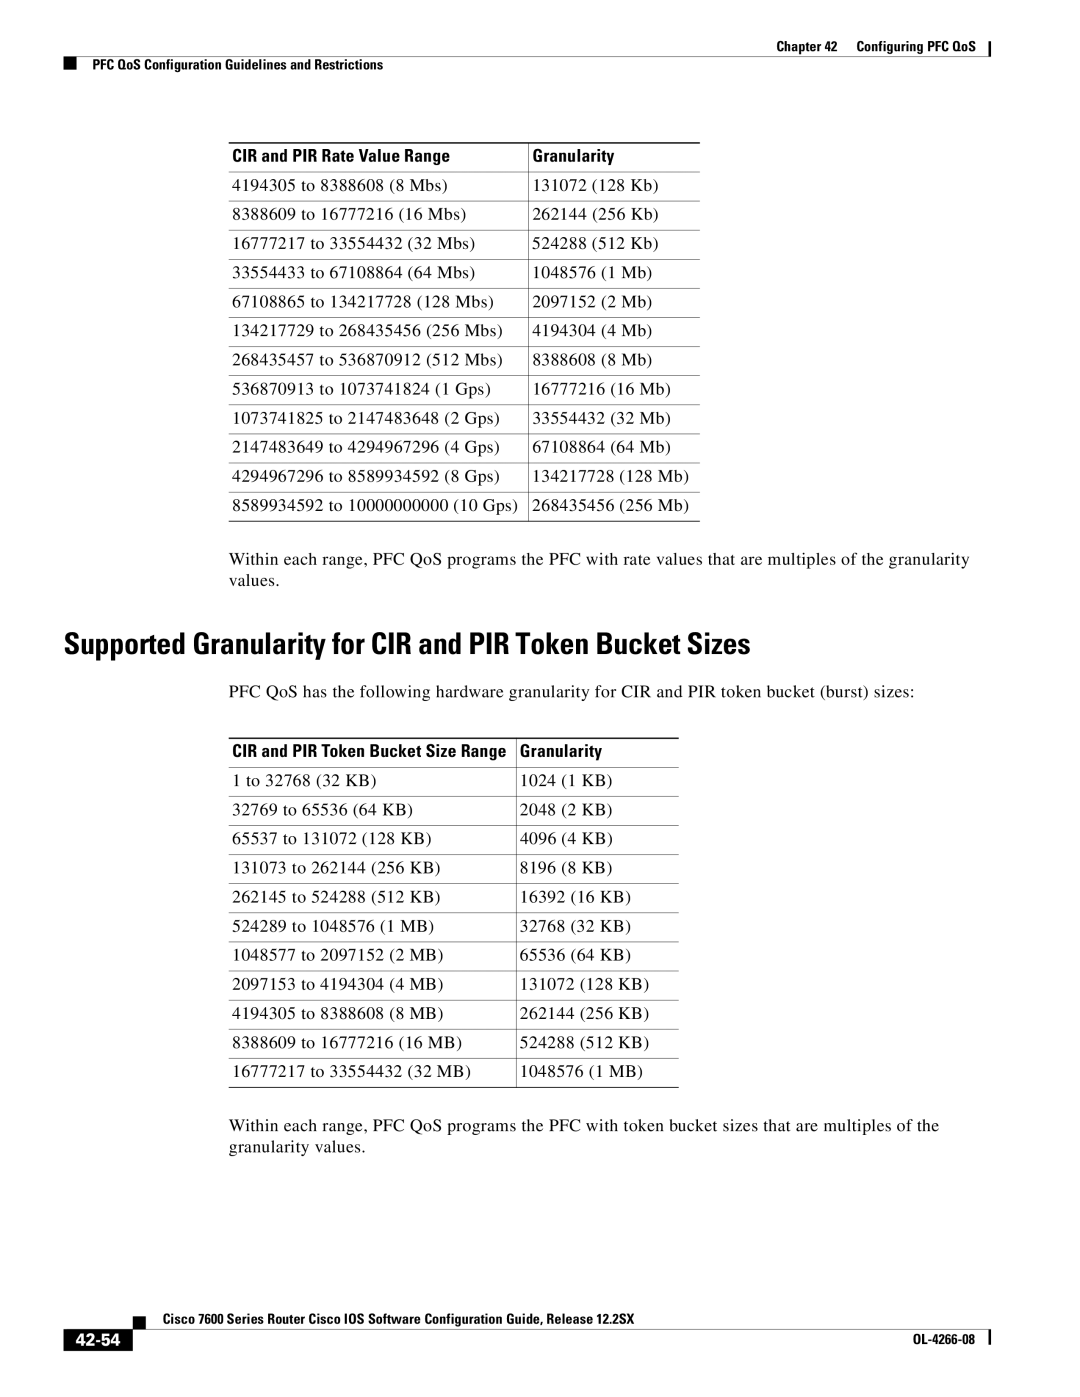 Cisco Systems OL-4266-08 manual Supported Granularity for CIR and PIR Token Bucket Sizes, 42-54 